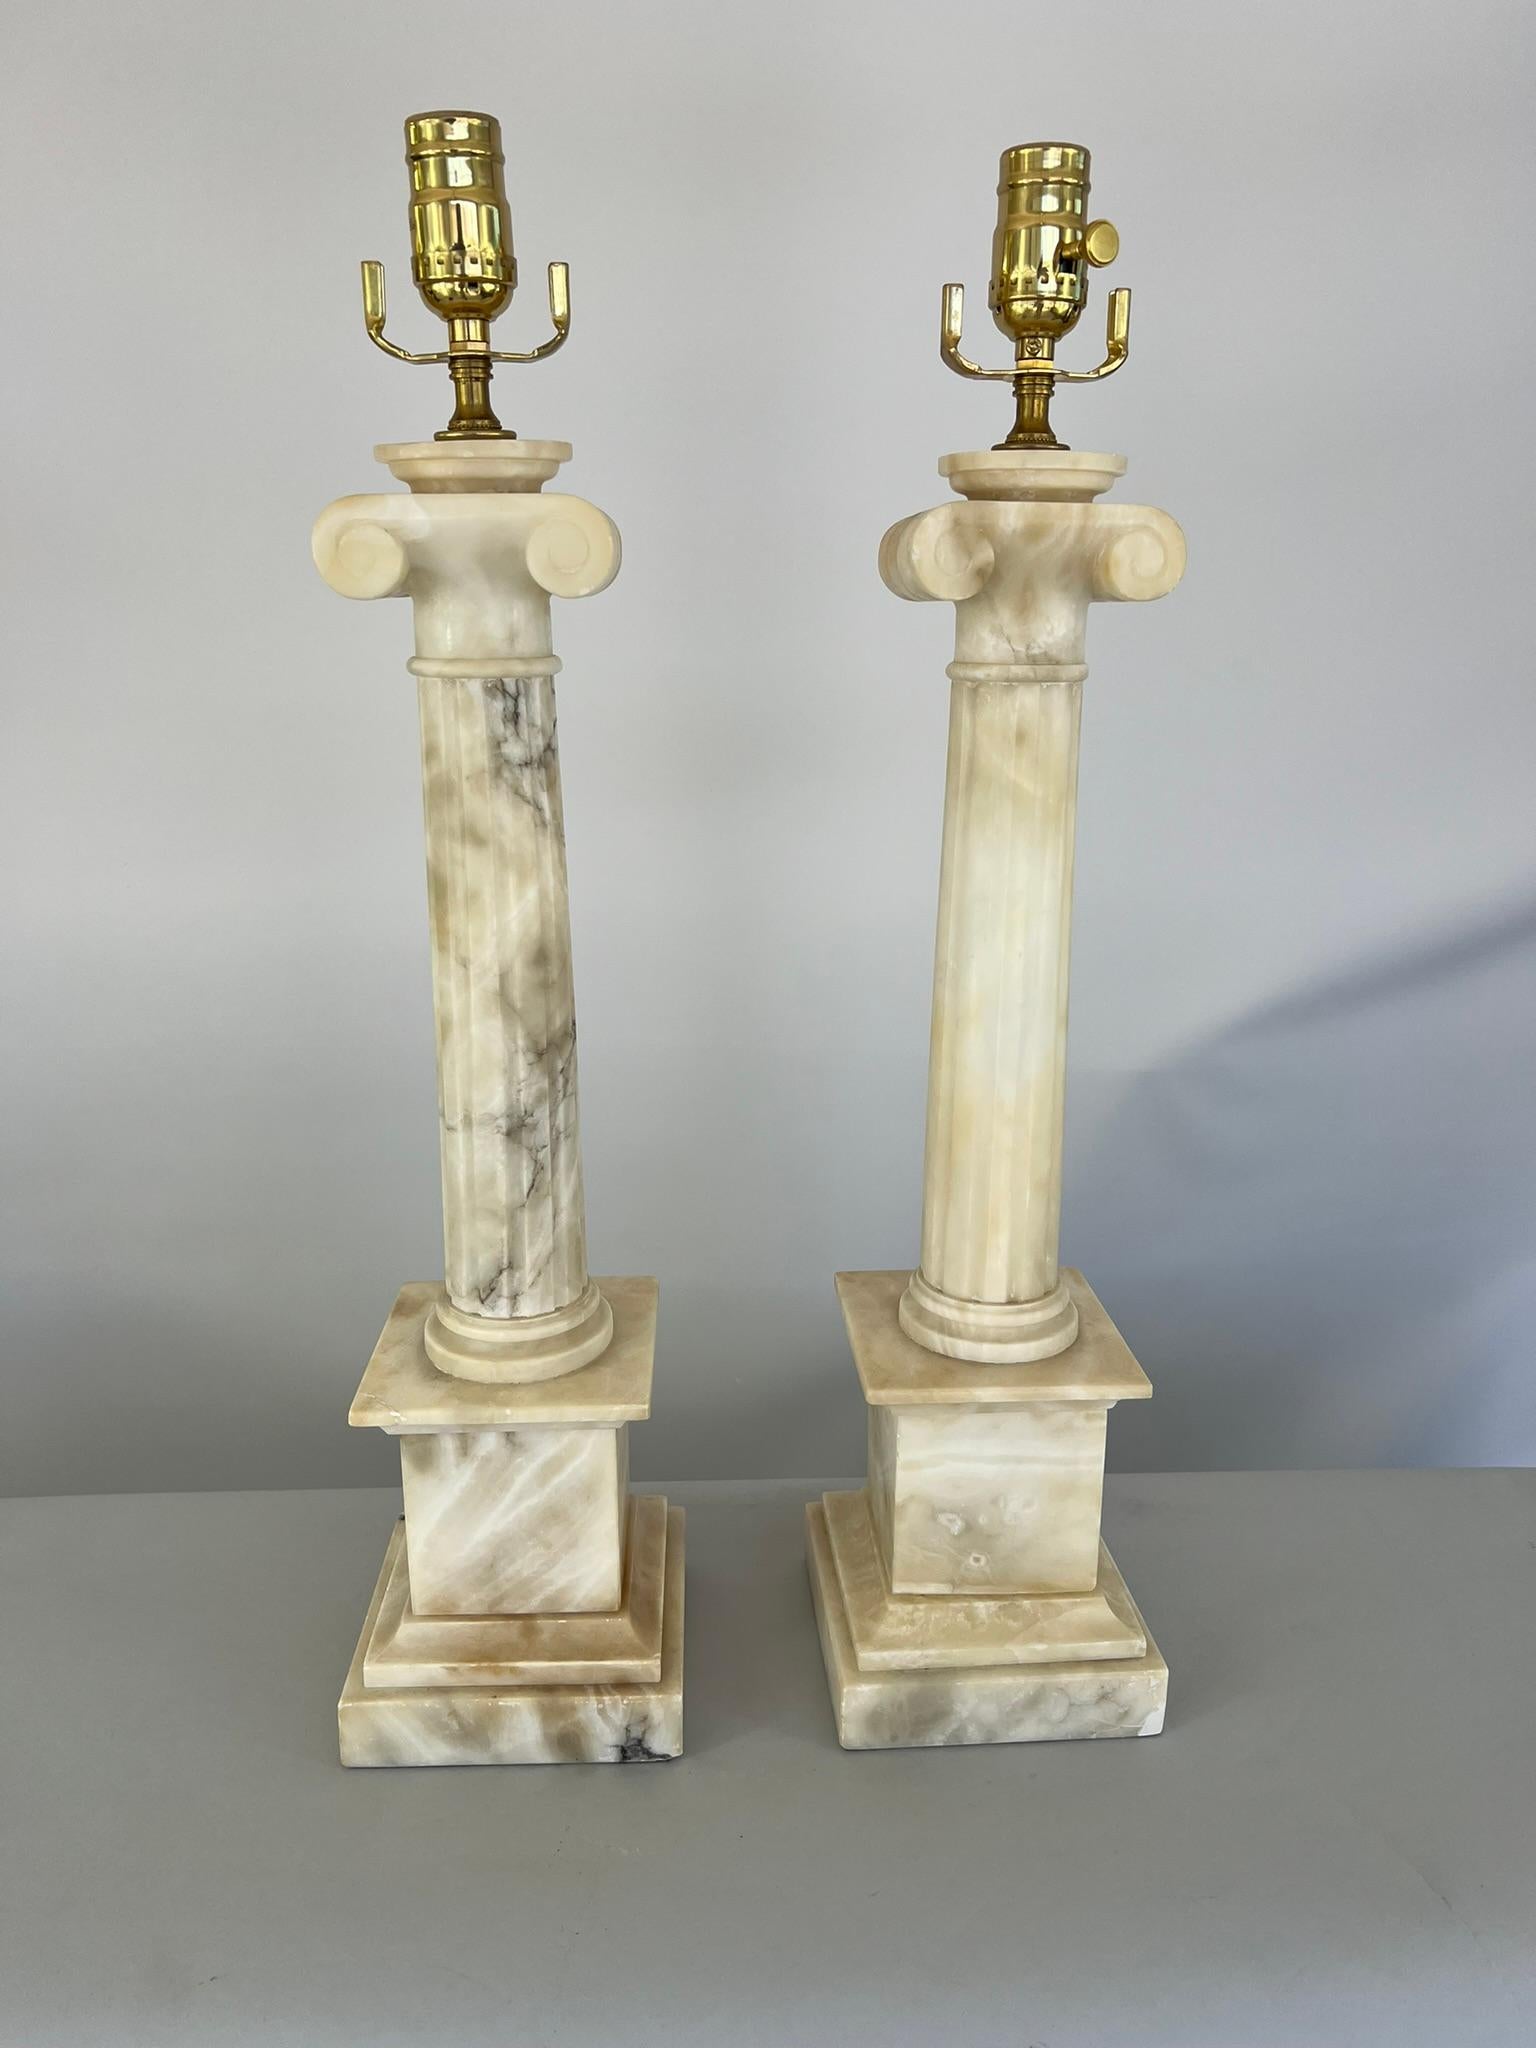 Pair of columnar-form table lamps, of carved alabaster, each a round, fluted, tapered column, with Ionic capital, on round foot, raised on square graduated plinth bases.

Stock ID: D3361.